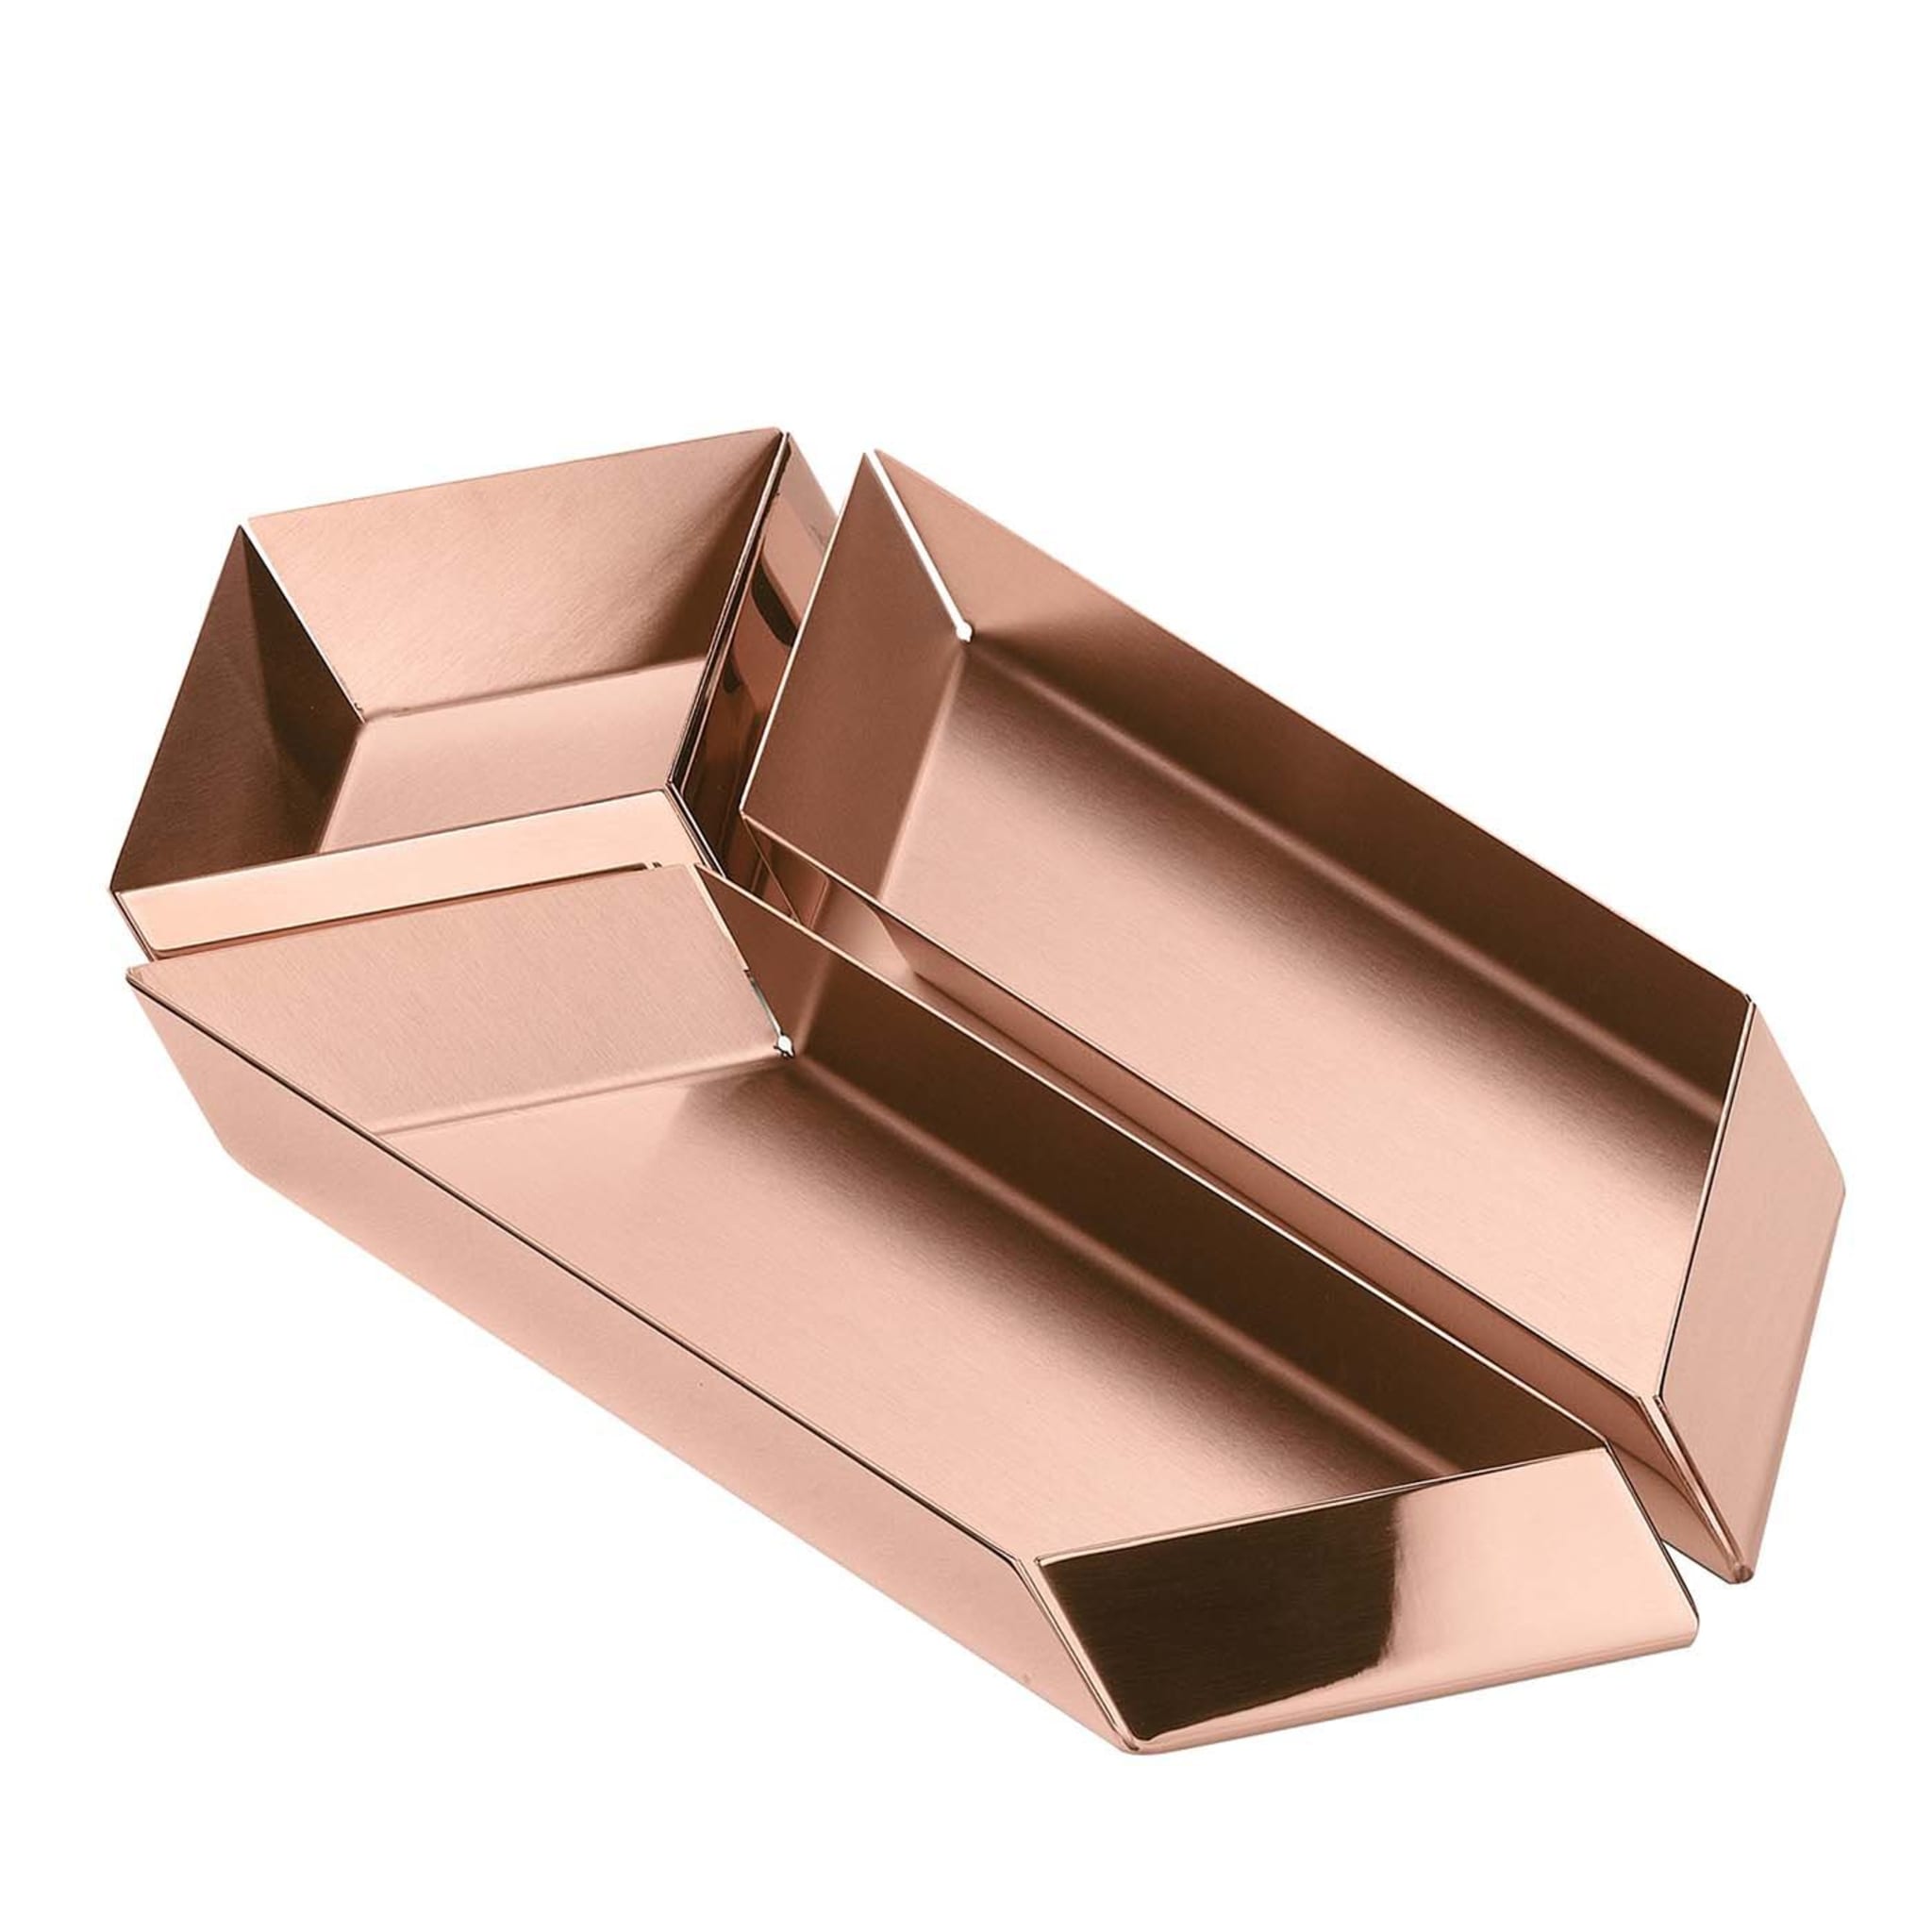 Set of 3 Axonometry Small Parallelepiped Copper Trays by Elisa Giovannoni - Main view